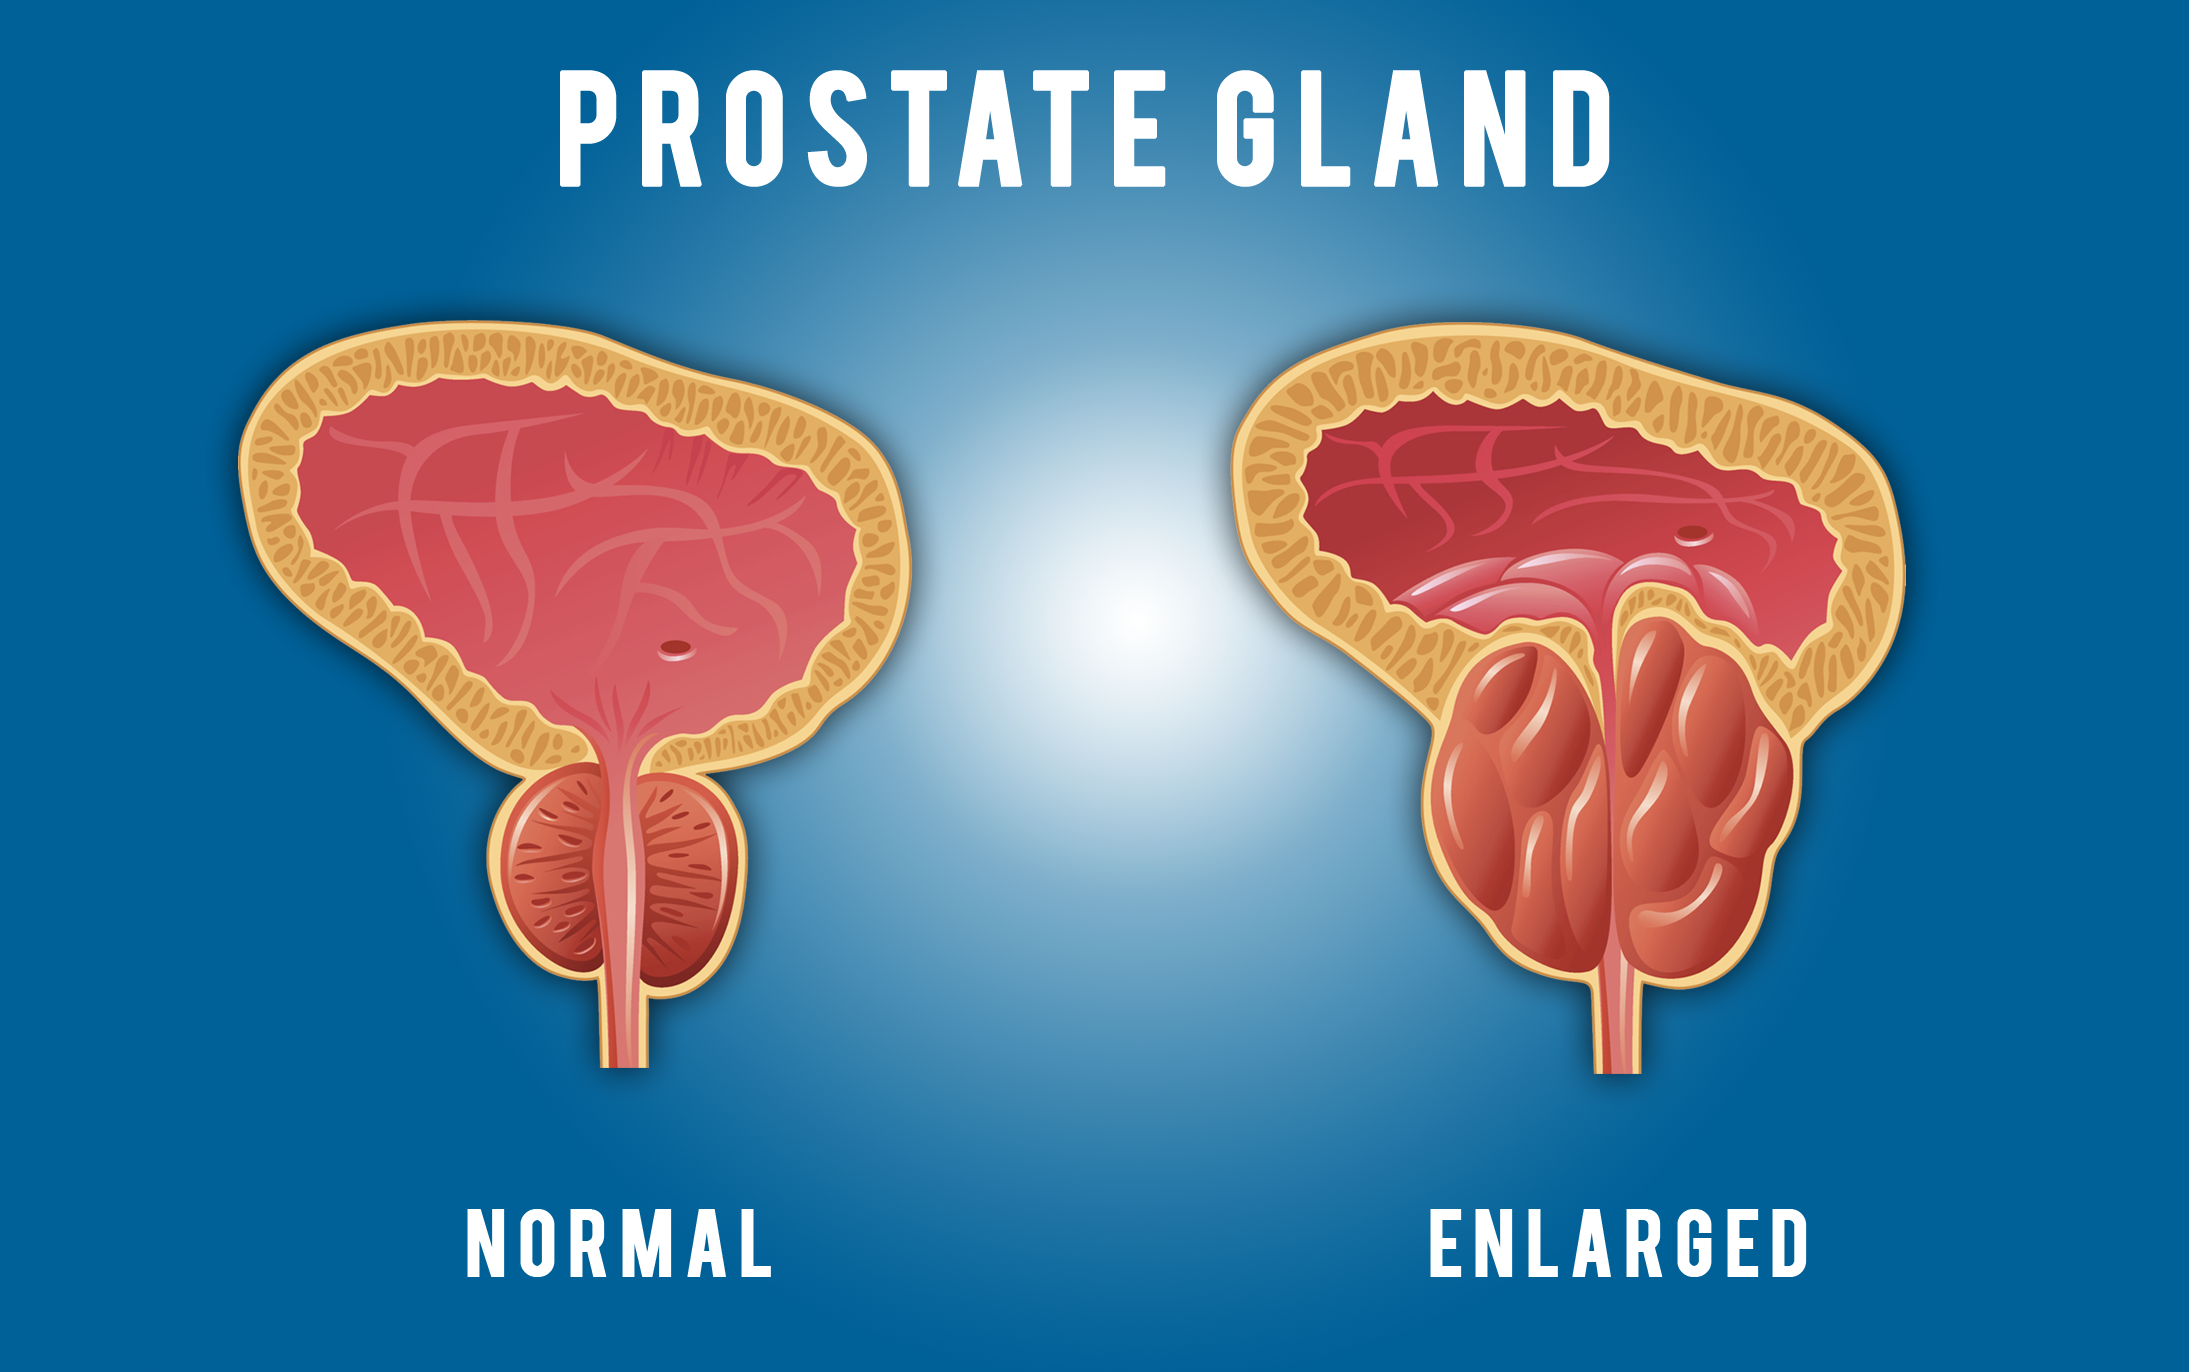 A New Prostate Cancer Treatment Offers Patients Years More Healthy Life.